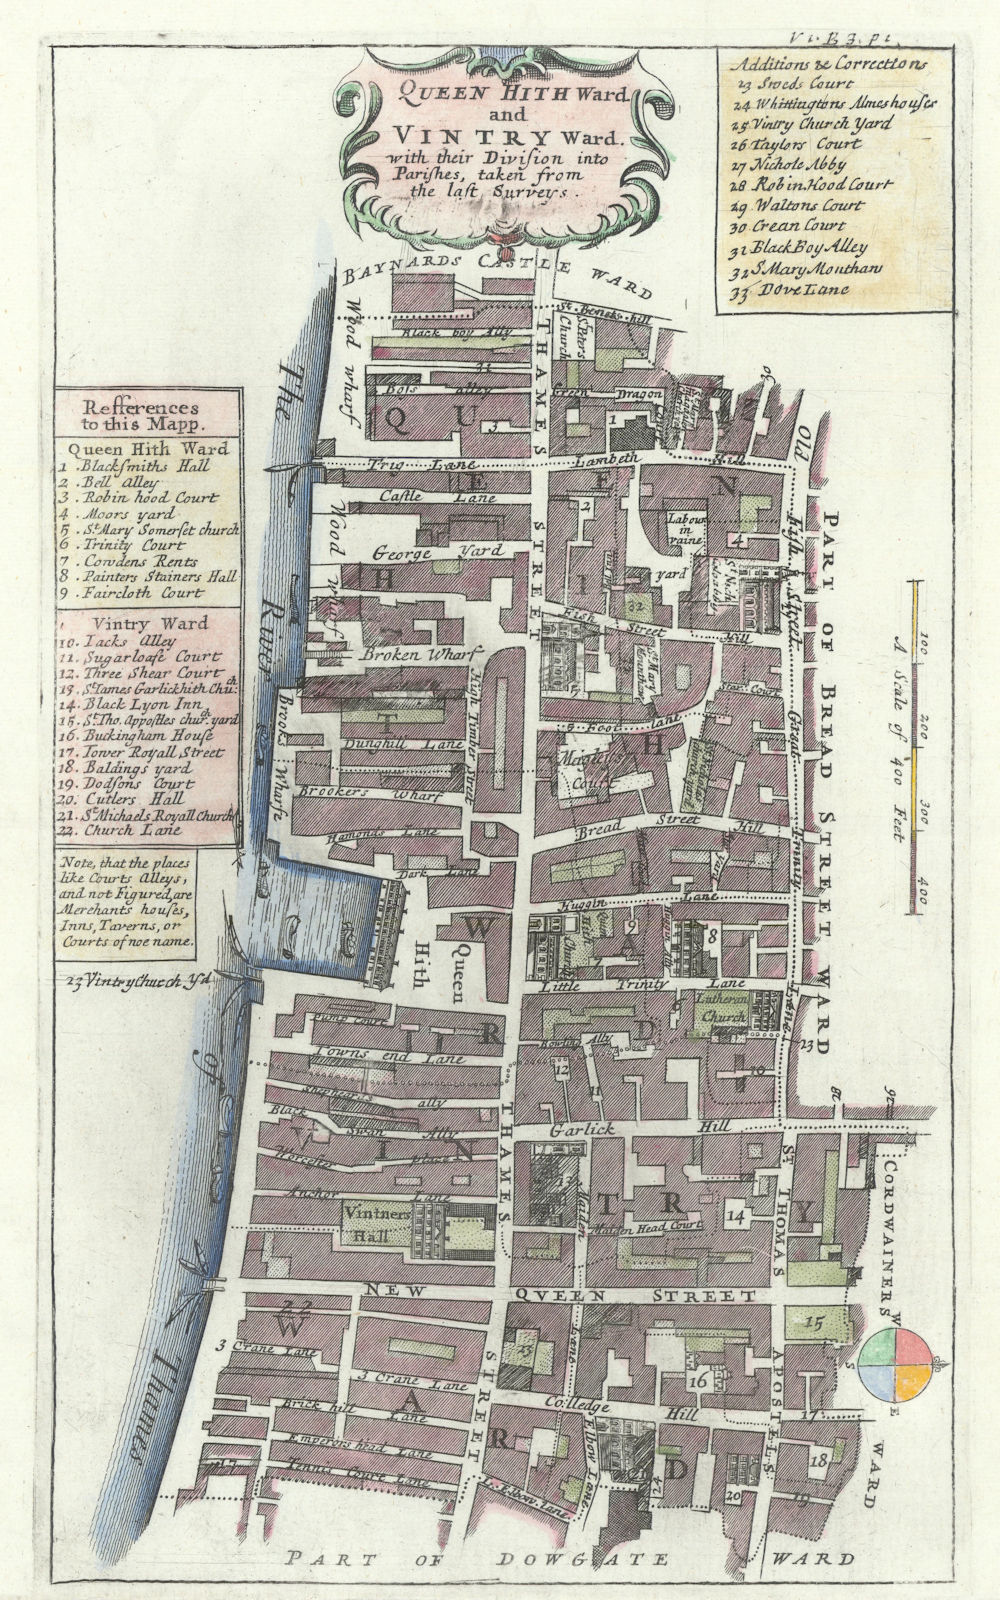 Queenhithe & Vintry Wards. Thames Street, City of London. STOW/STRYPE 1720 map